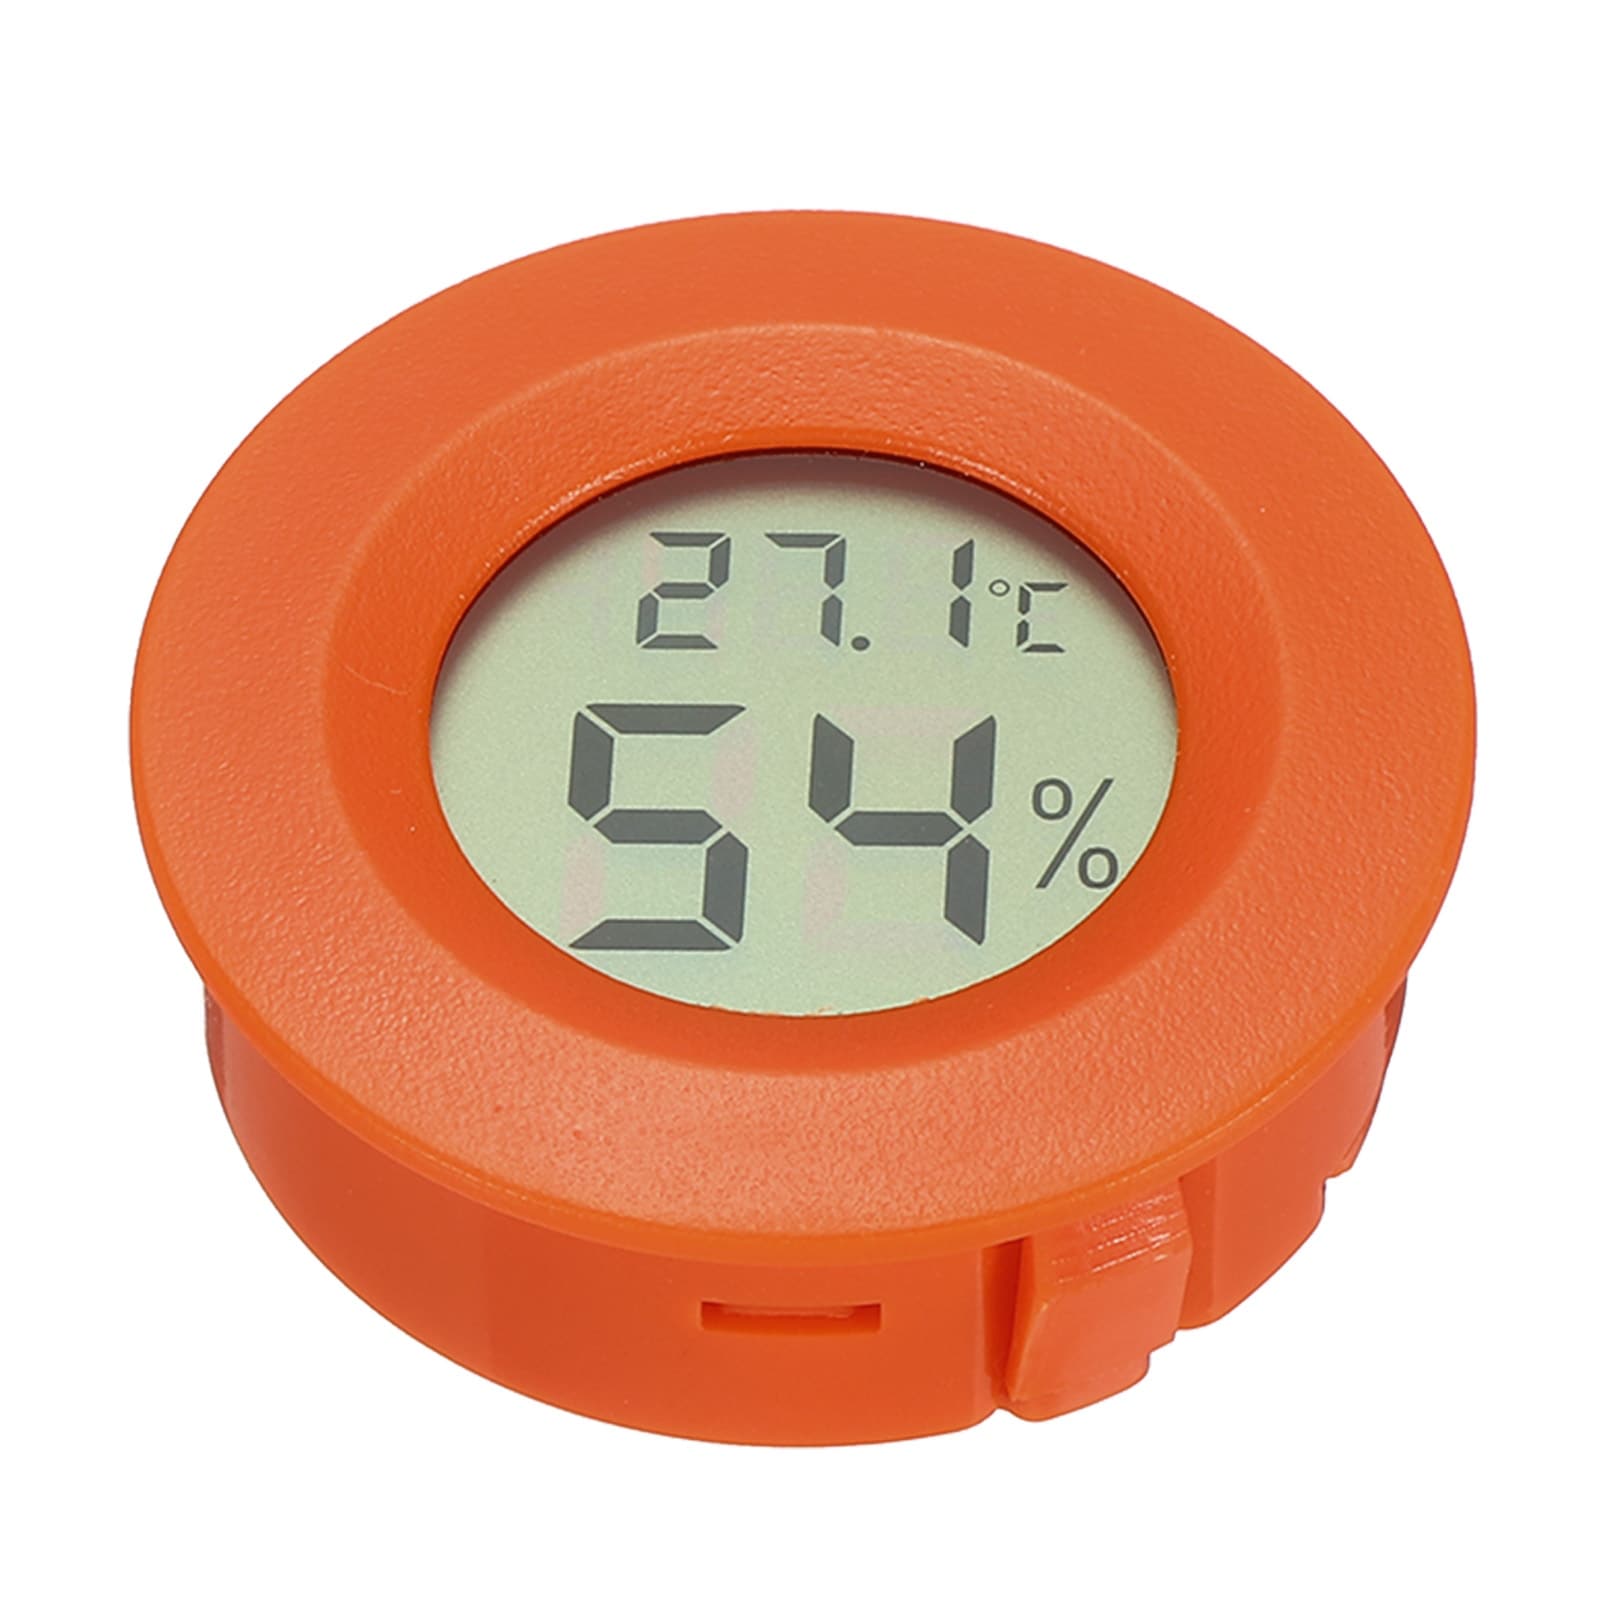 https://ak1.ostkcdn.com/images/products/is/images/direct/65372a1b85c8f773ca0c4a960128b562001e016f/Mini-Thermometer-Hygrometer-Digital-LCD-Temperature-Humidity-Meter-Red.jpg